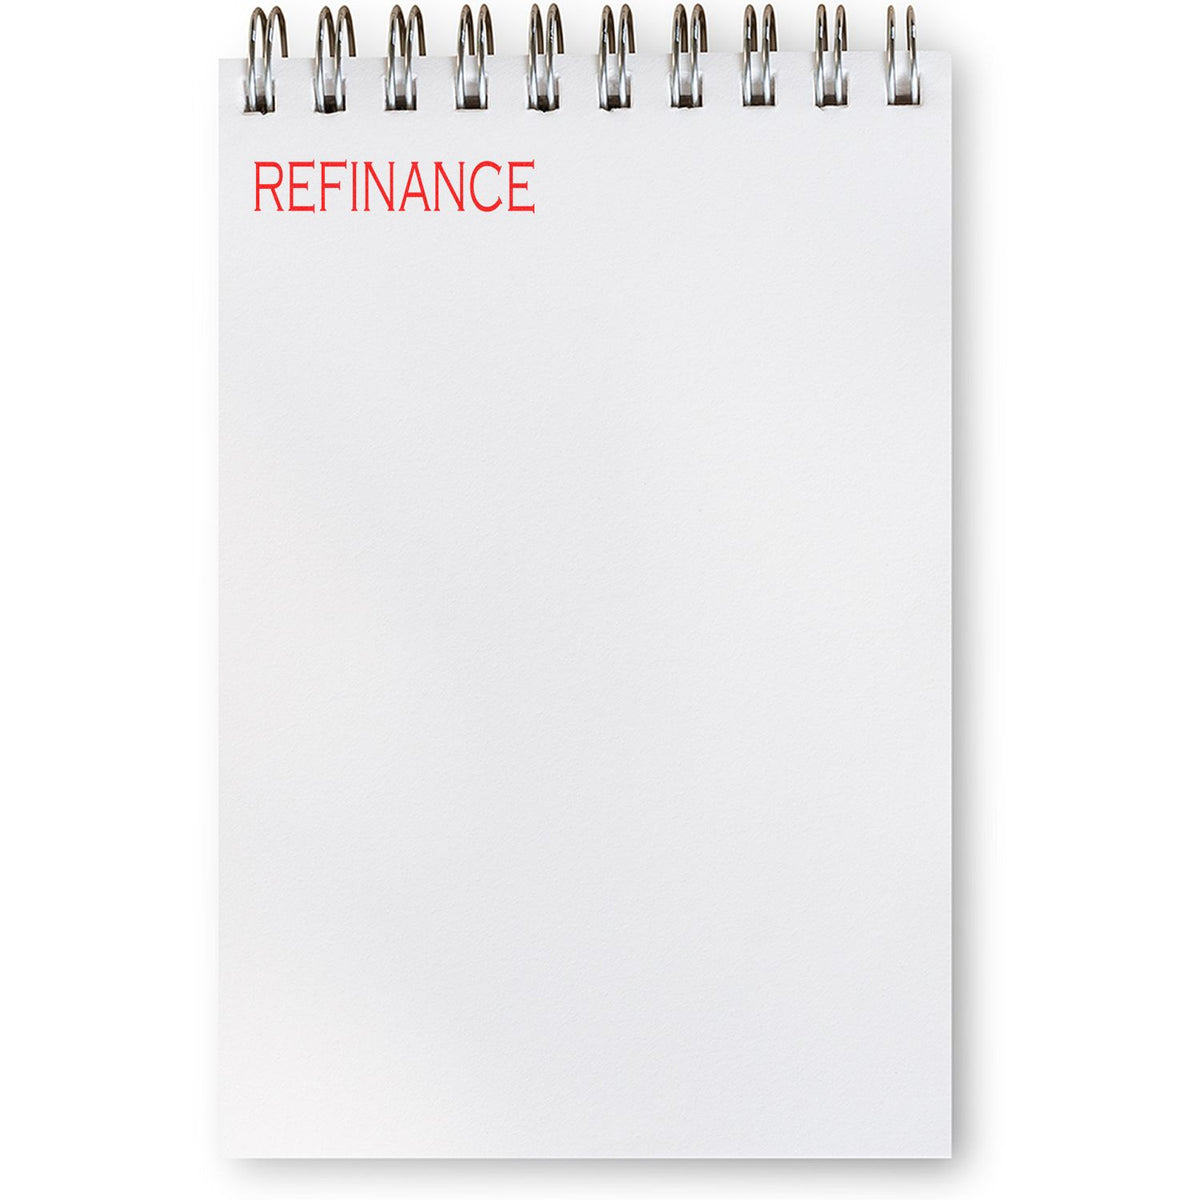 Large Refinance Rubber Stamp In Use Photo